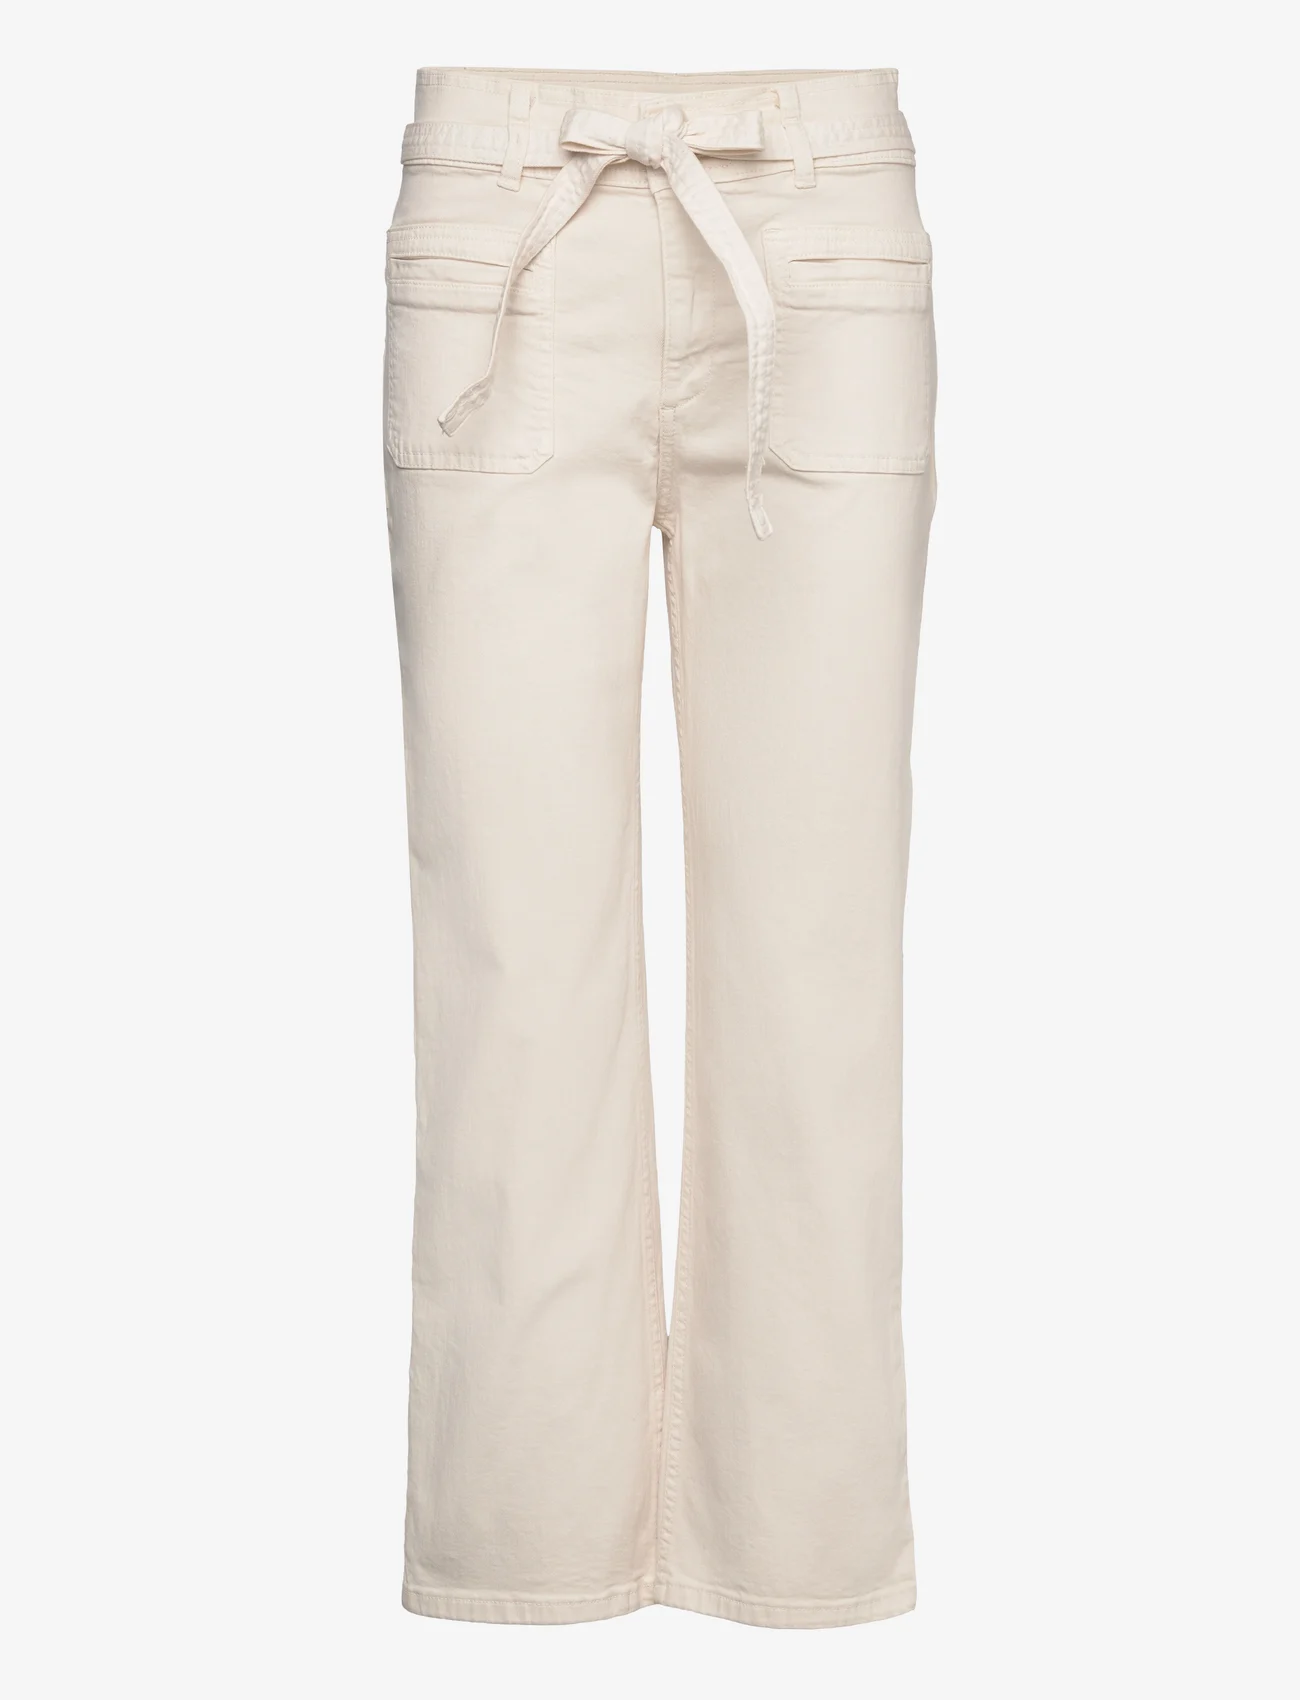 Mango - Straight-leg jeans with bow detail - bootcut jeans - light beige - 0